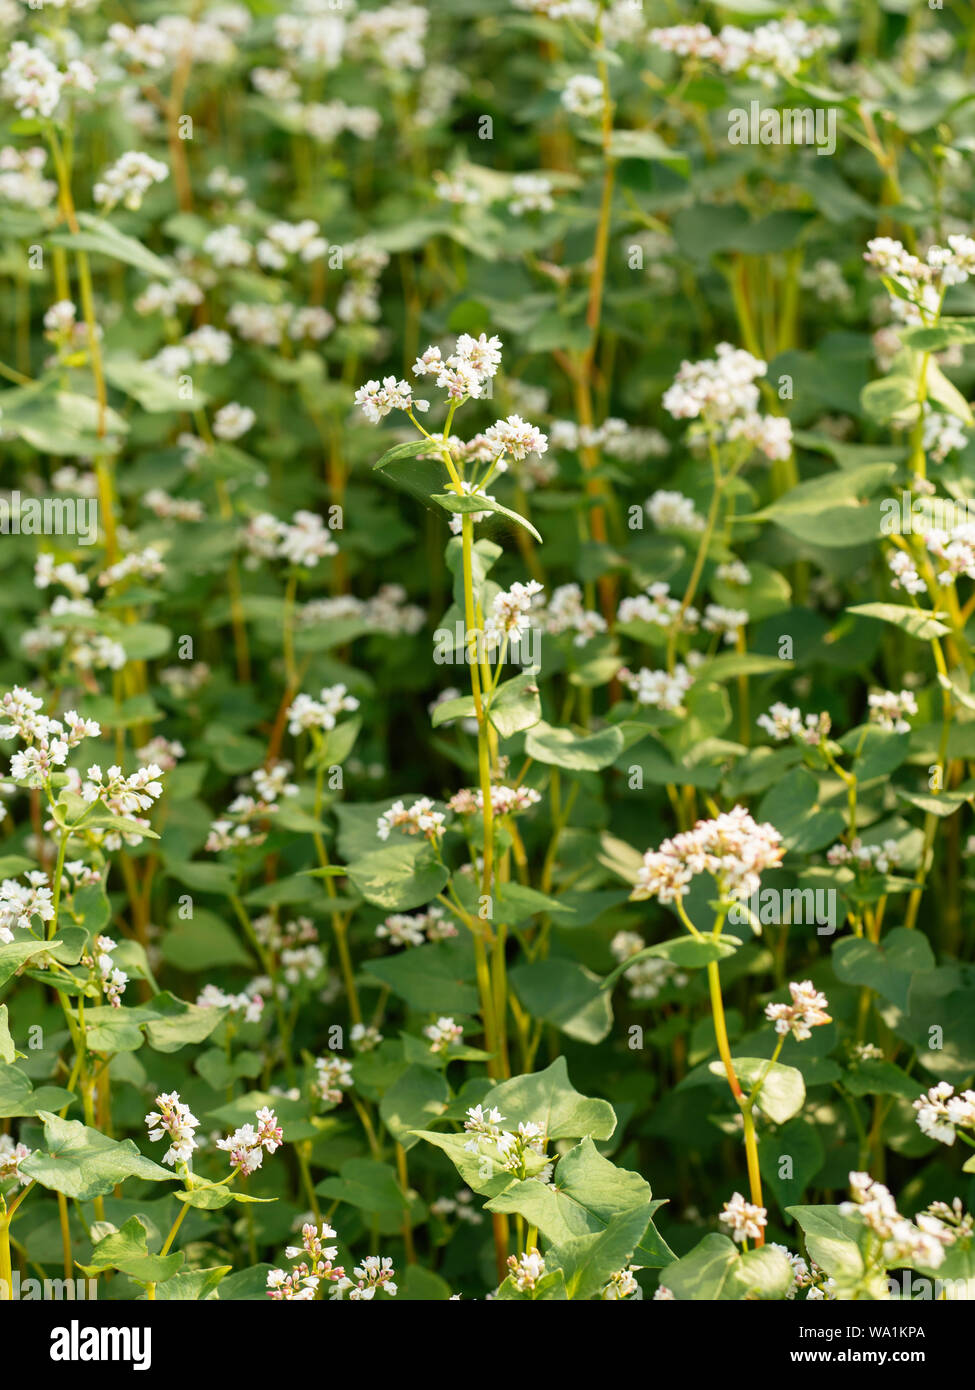 Blooming Buckwheat As Green Manure And Cover Crop In An Organic